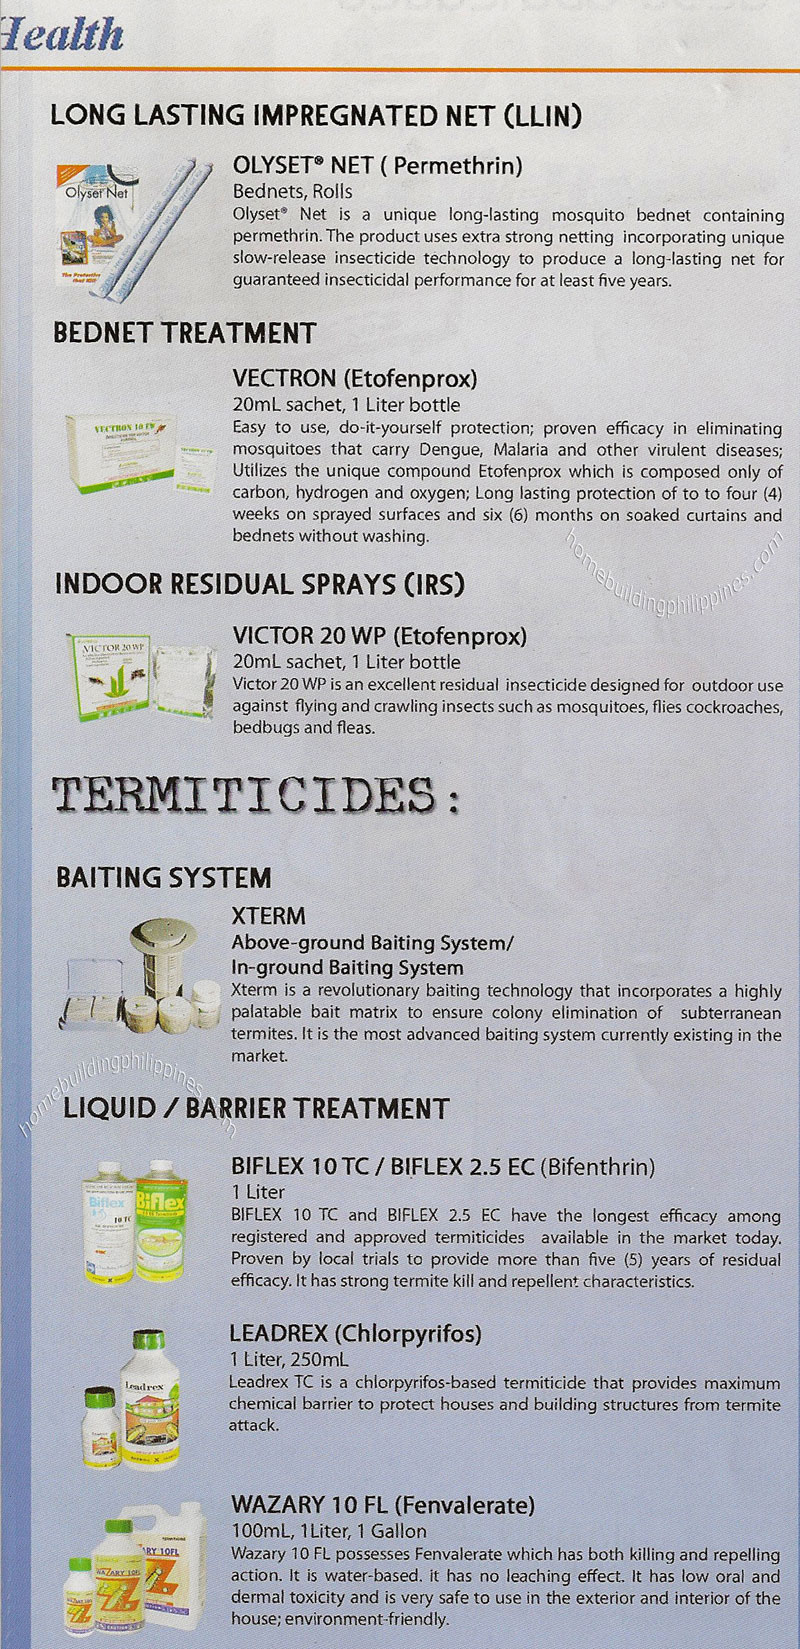 Termiticides: Baiting System; Barrier Treatment